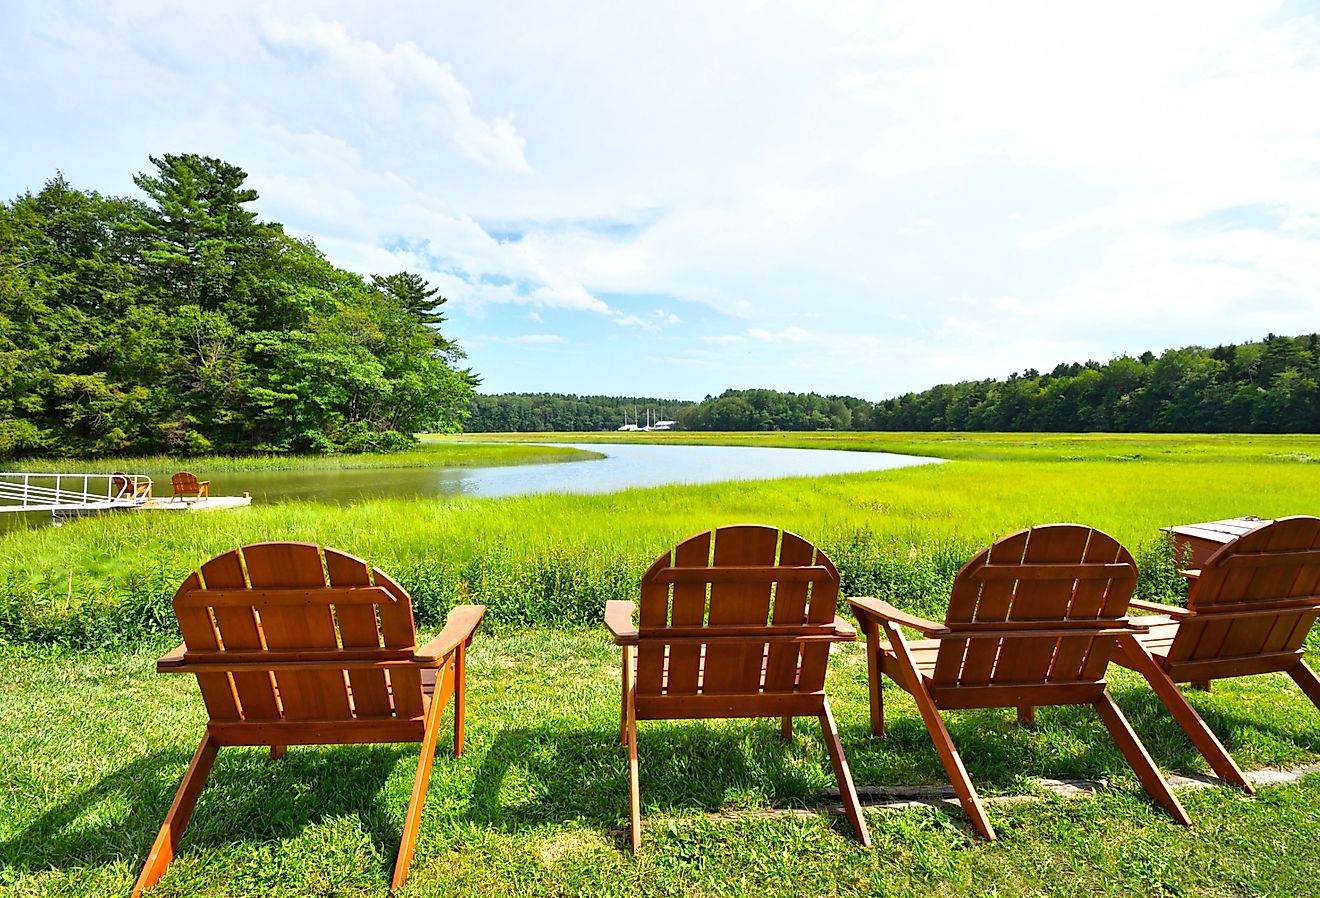 Adirondack chairs by the River Yarmouth, Maine.